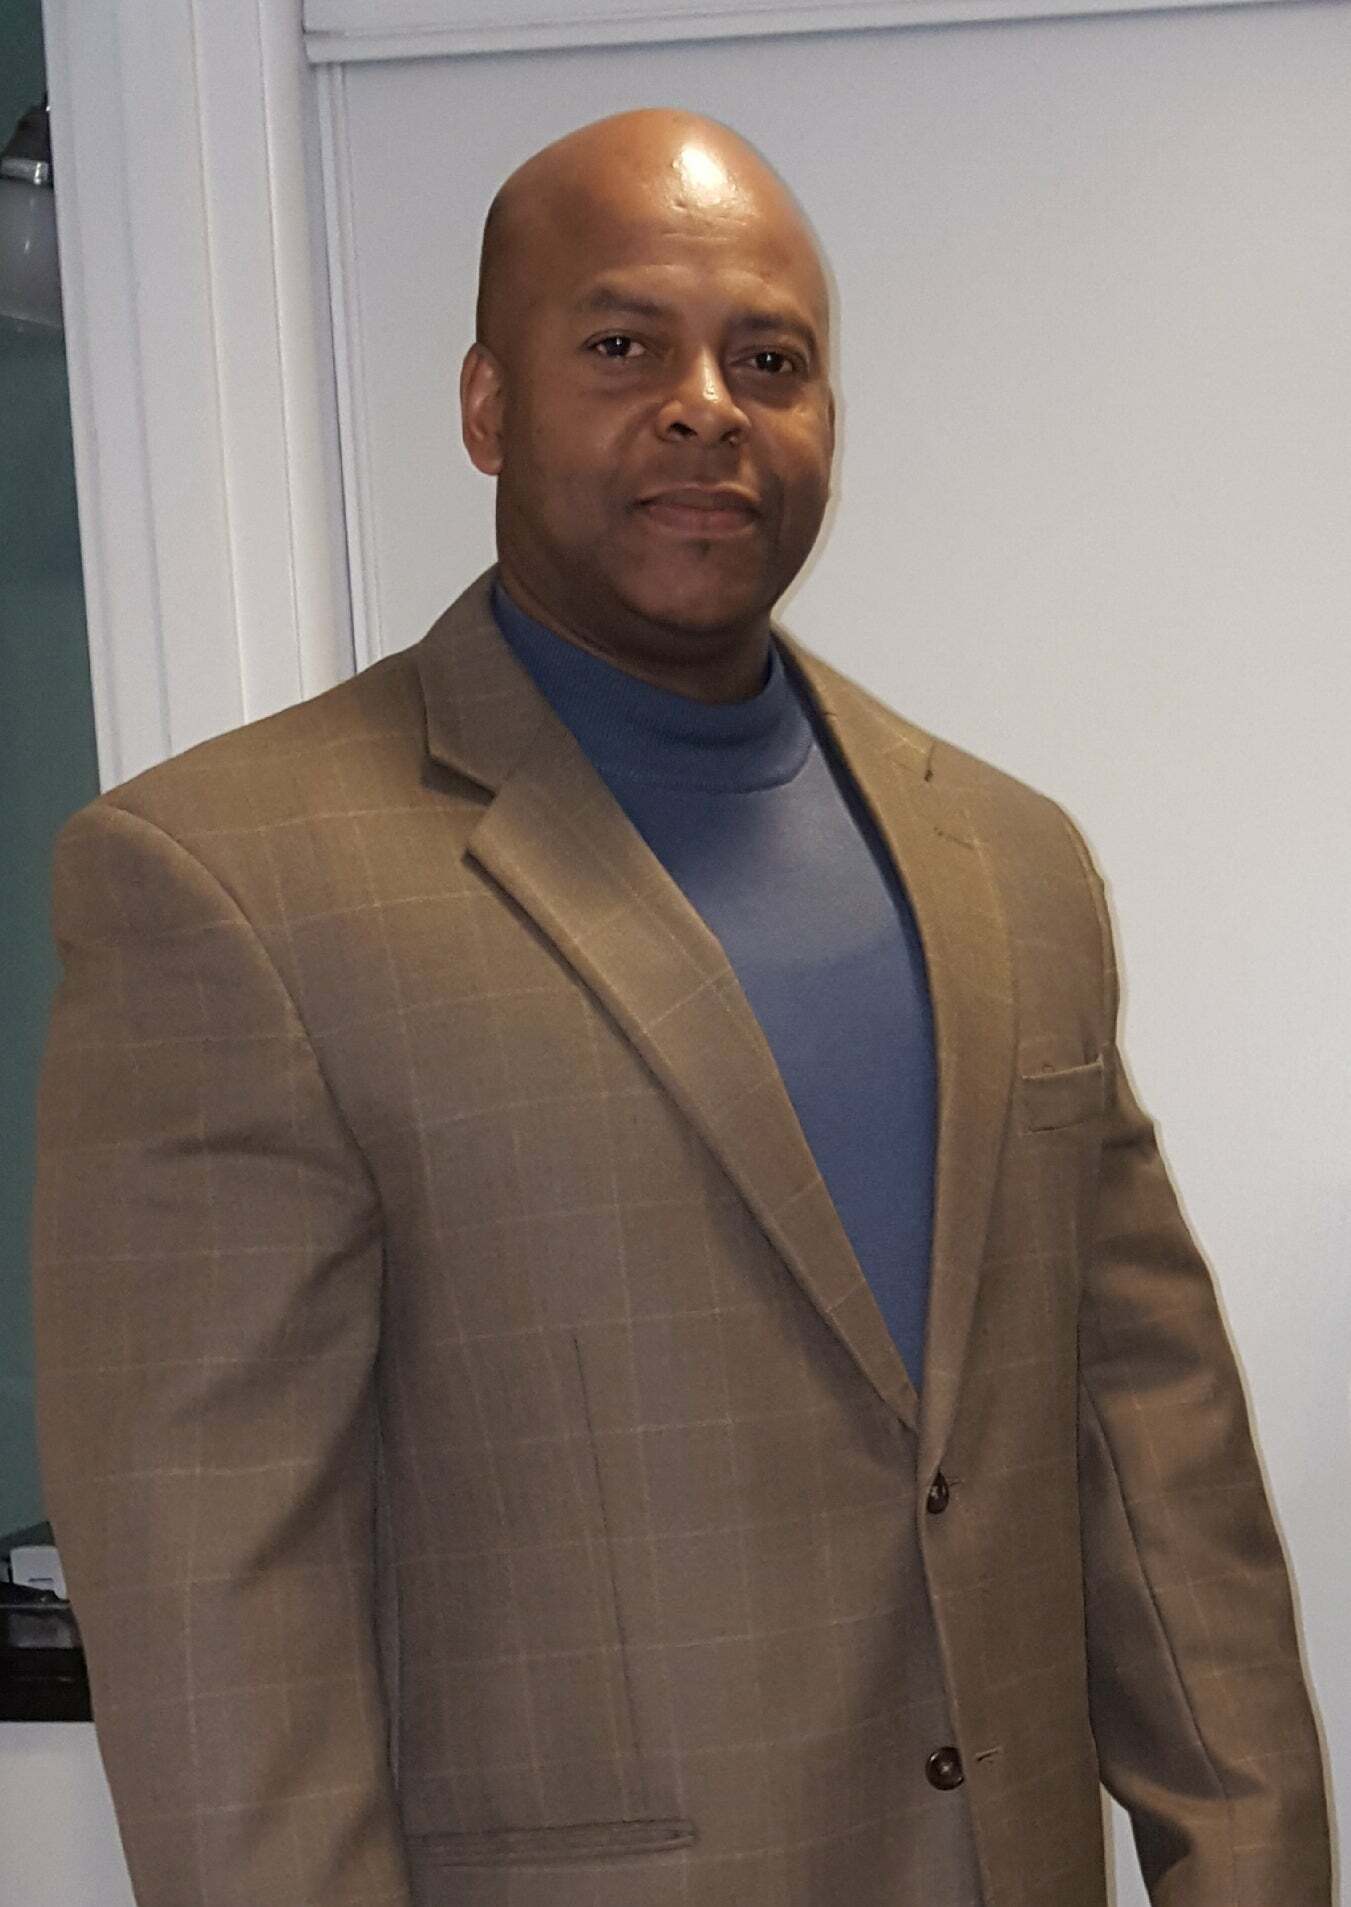 Olando Graves, Real Estate Salesperson in Oakland, Reliance Partners